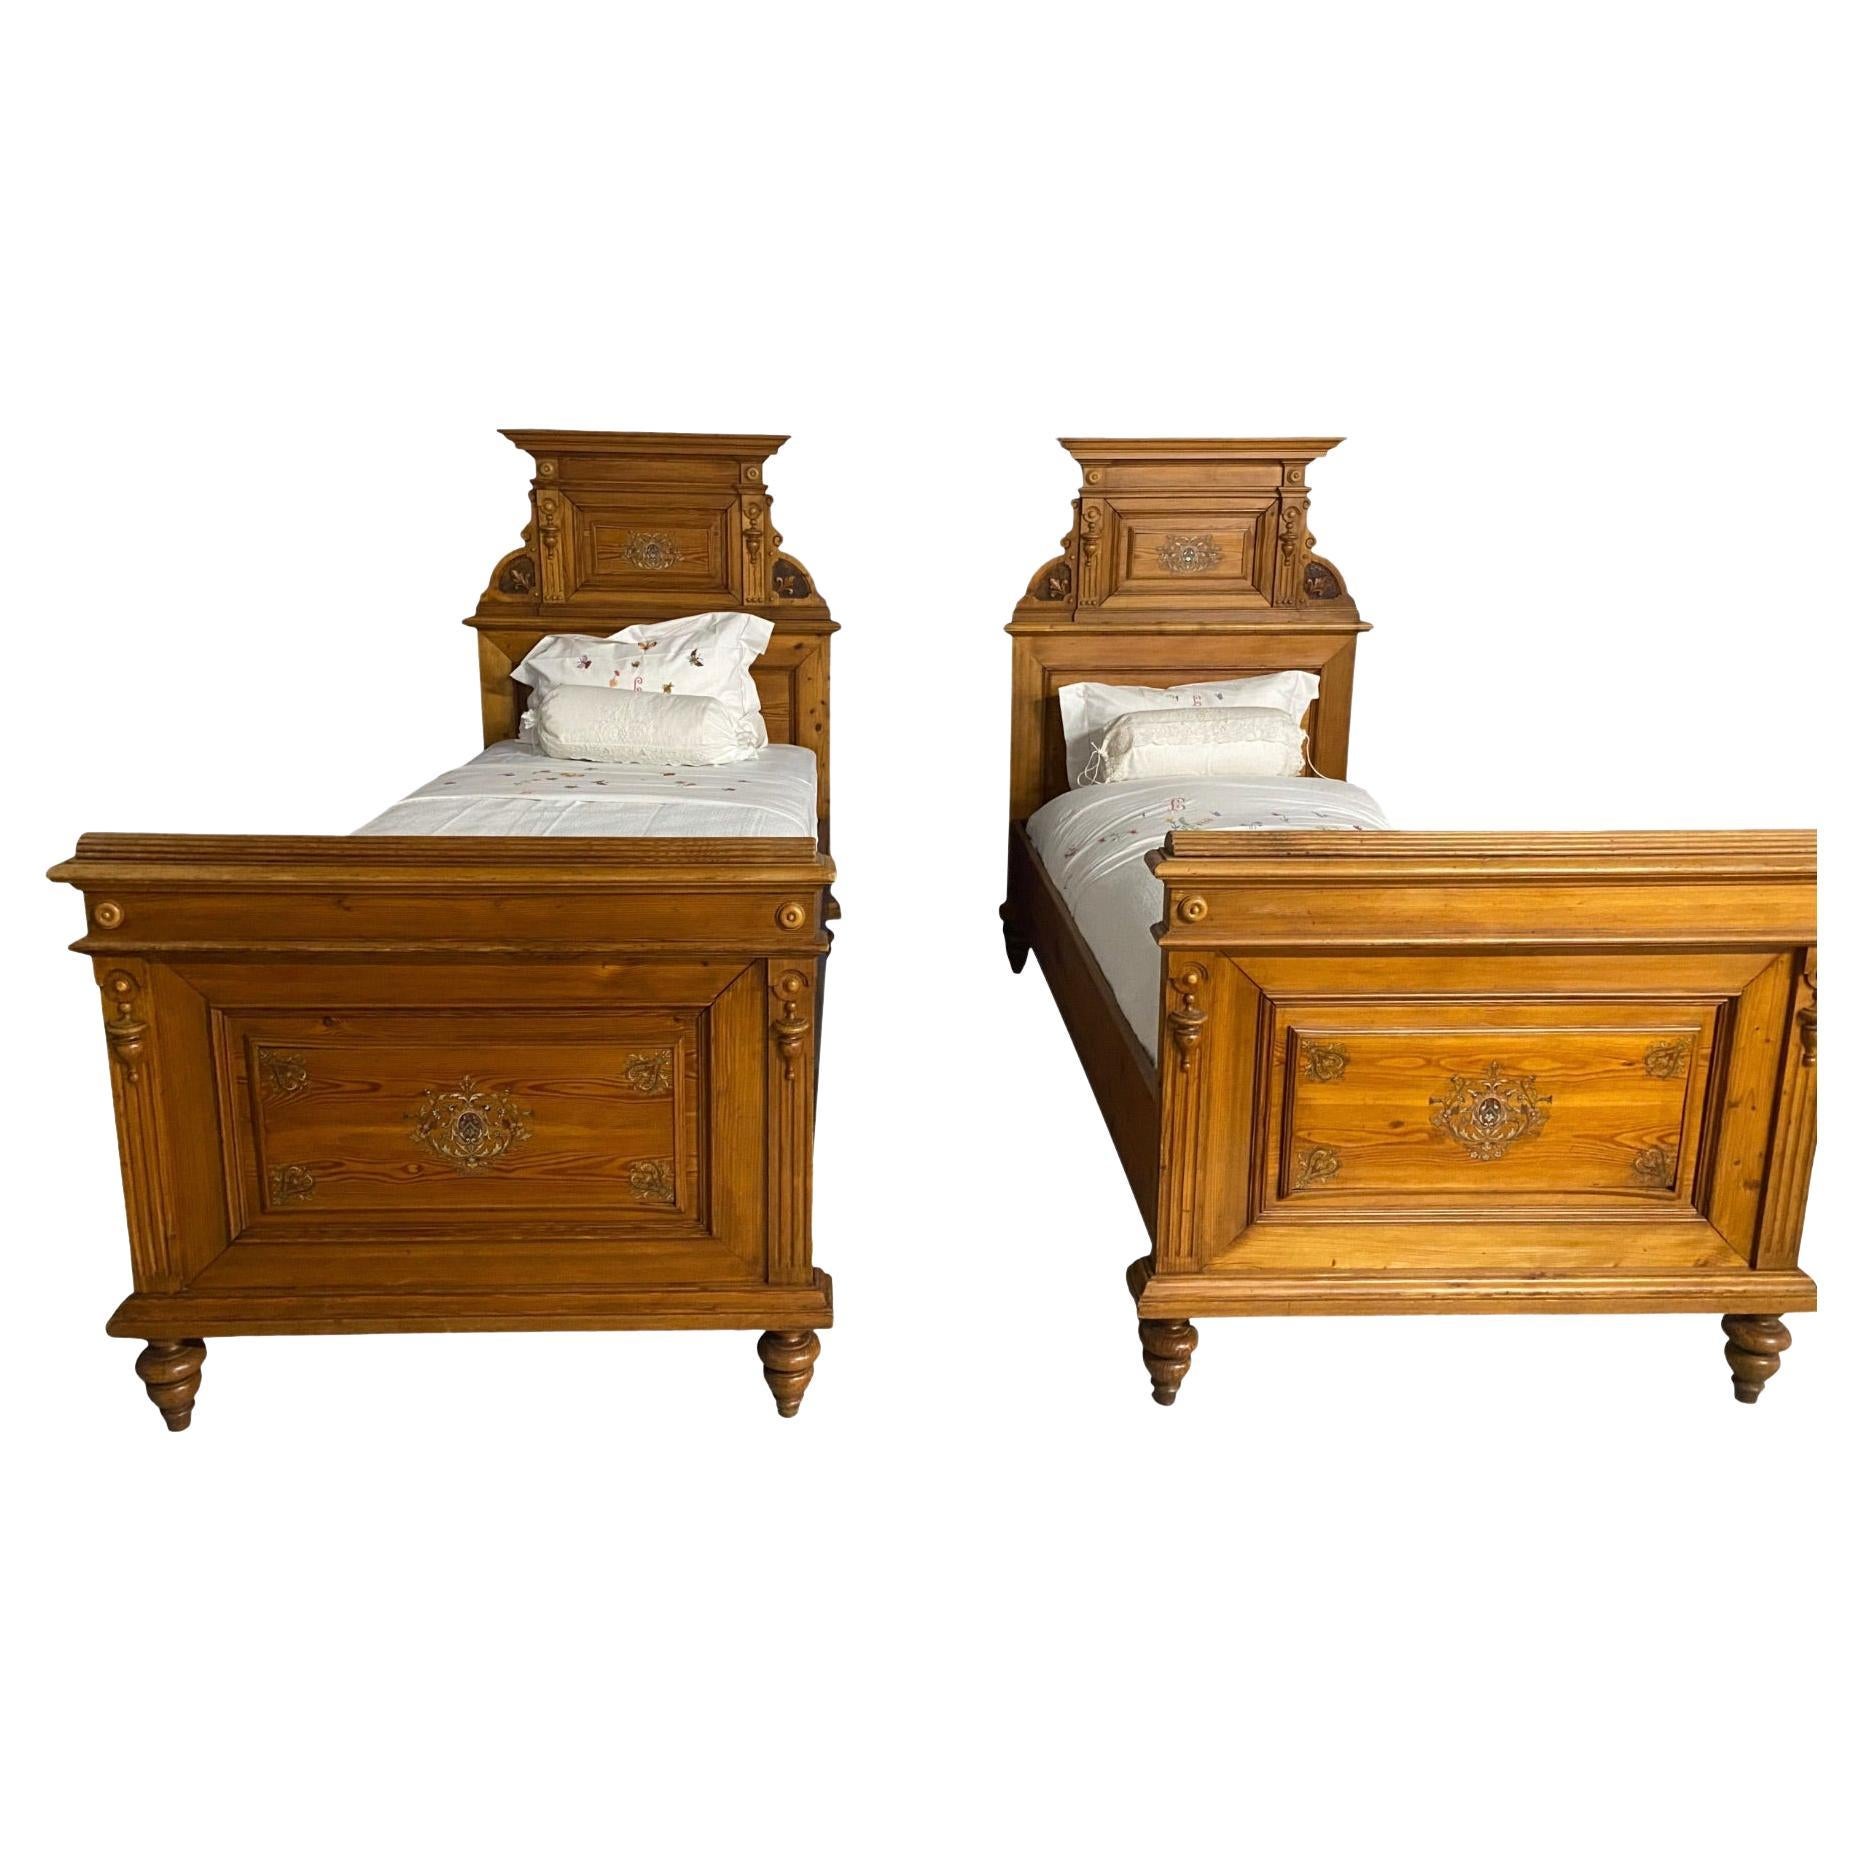 Pair of 19th Century Austrian Pine Beds with Brass Inlay